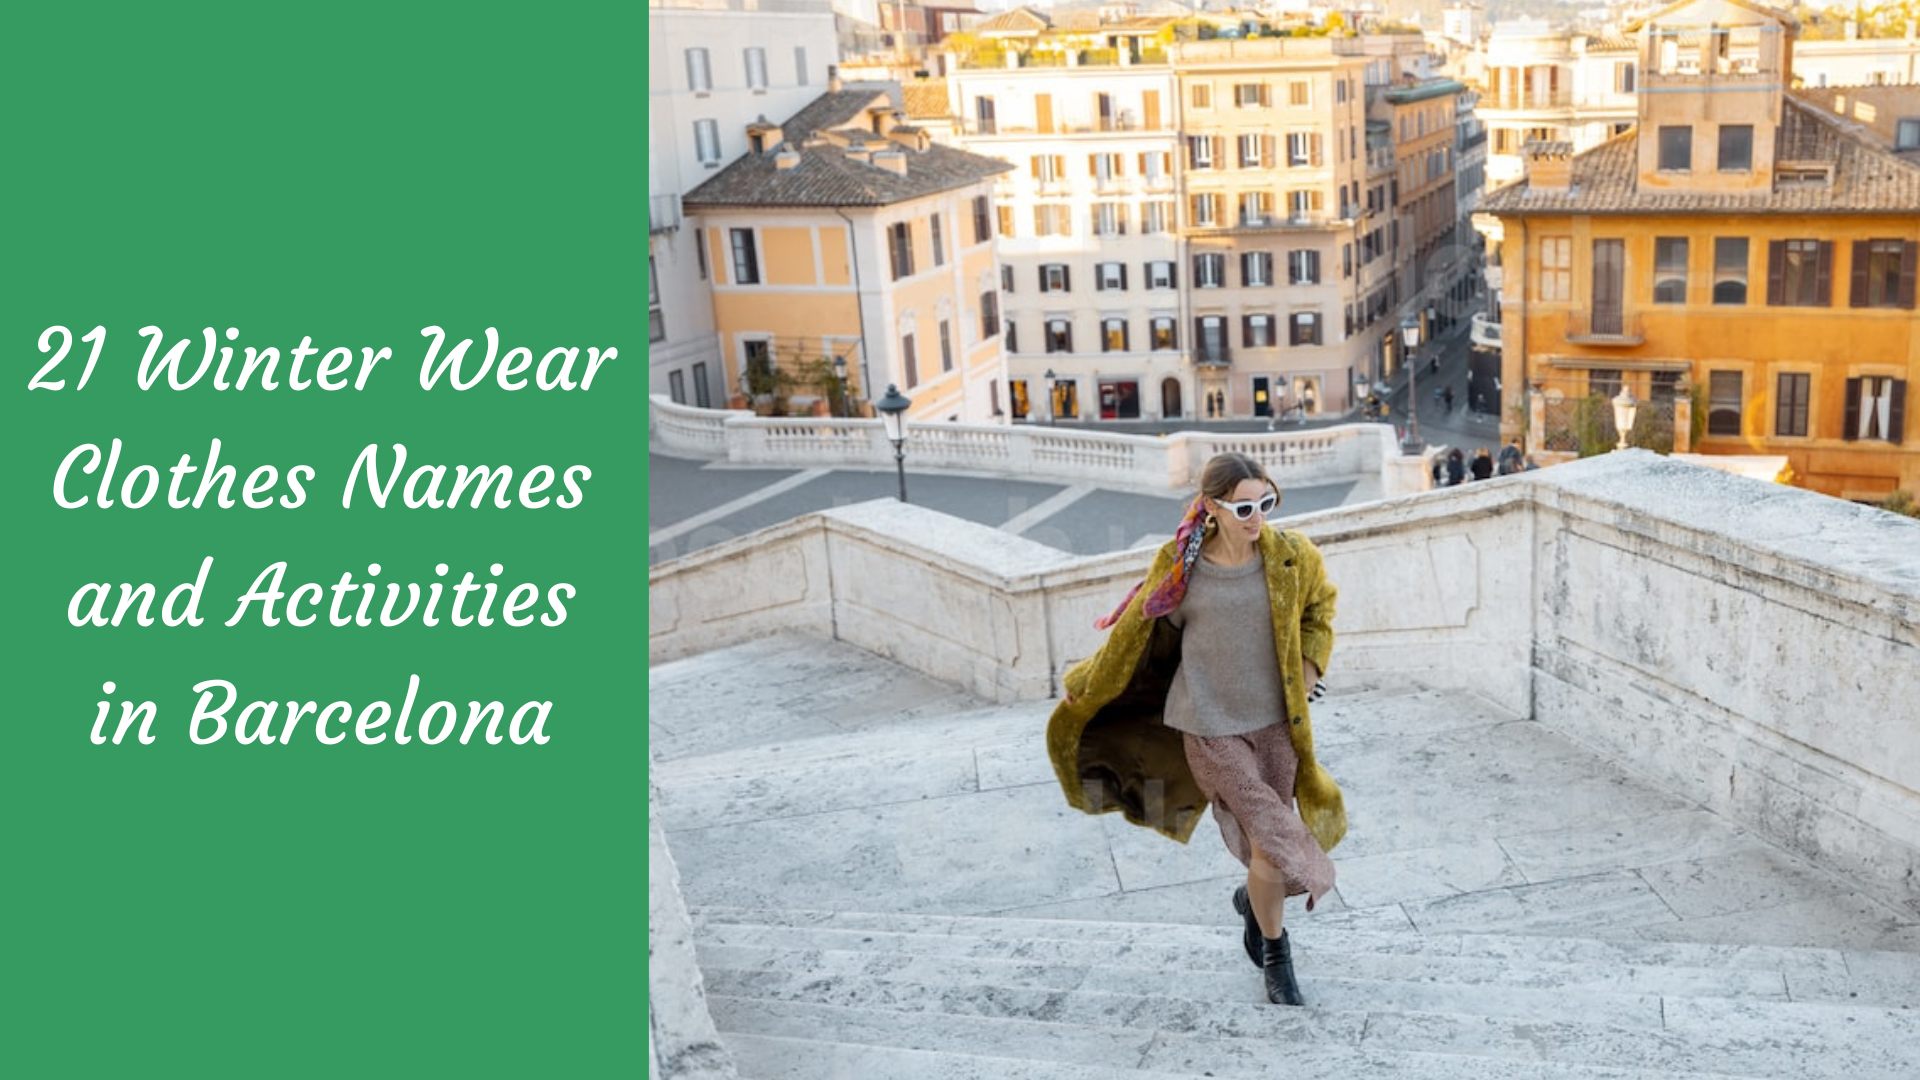 21 Winter Wear Clothes Names and Activities in Barcelona - The